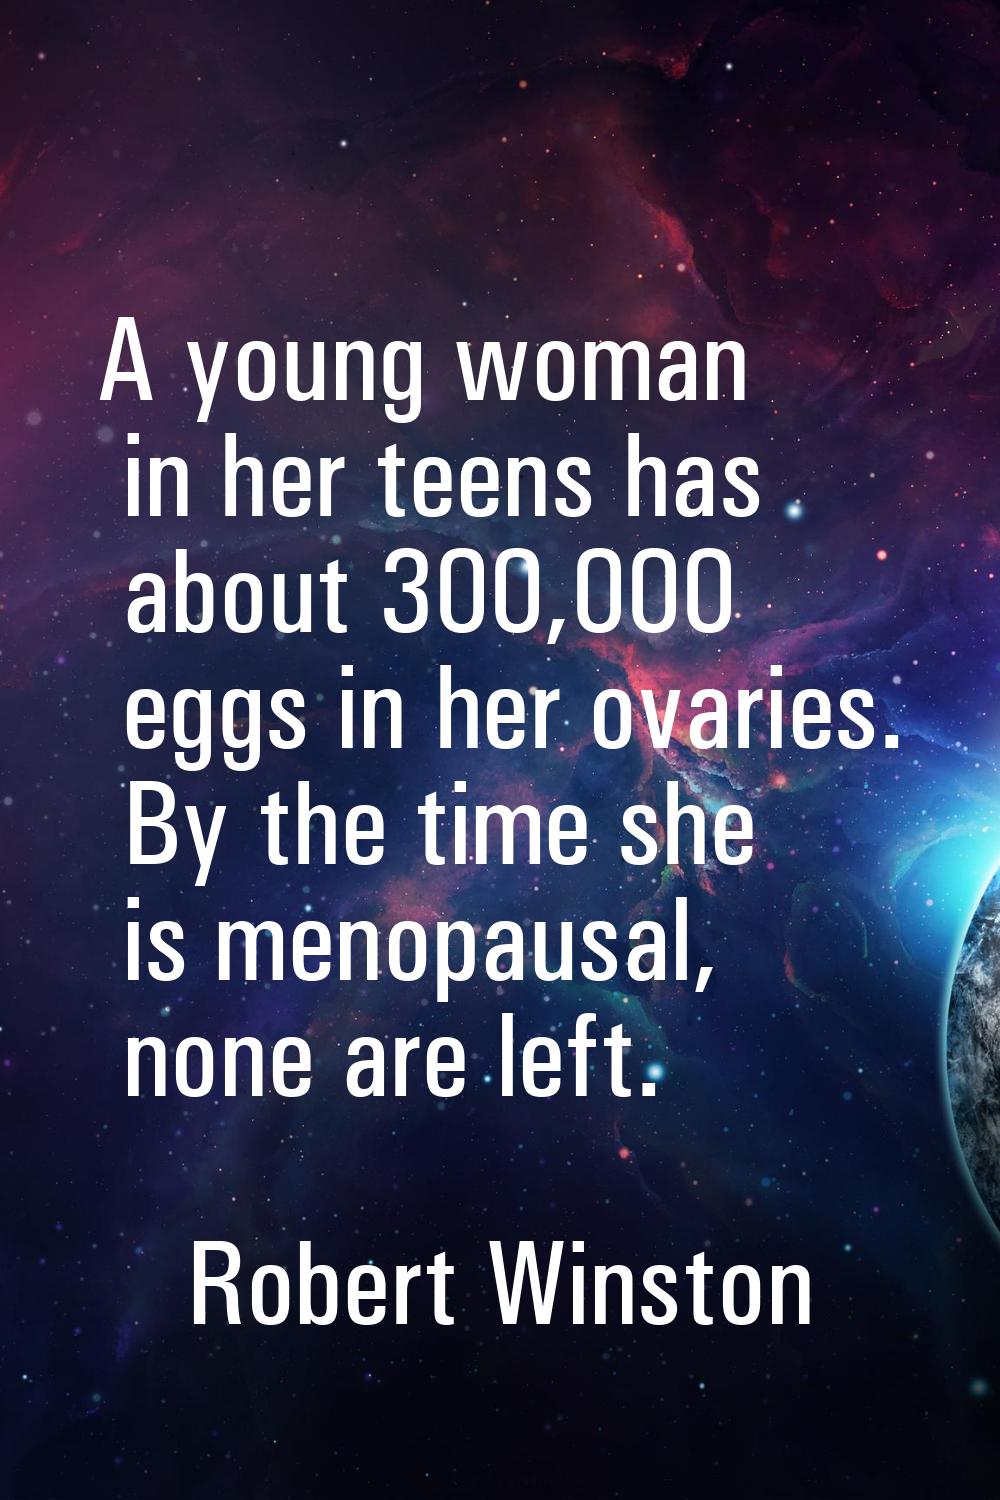 A young woman in her teens has about 300,000 eggs in her ovaries. By the time she is menopausal, no